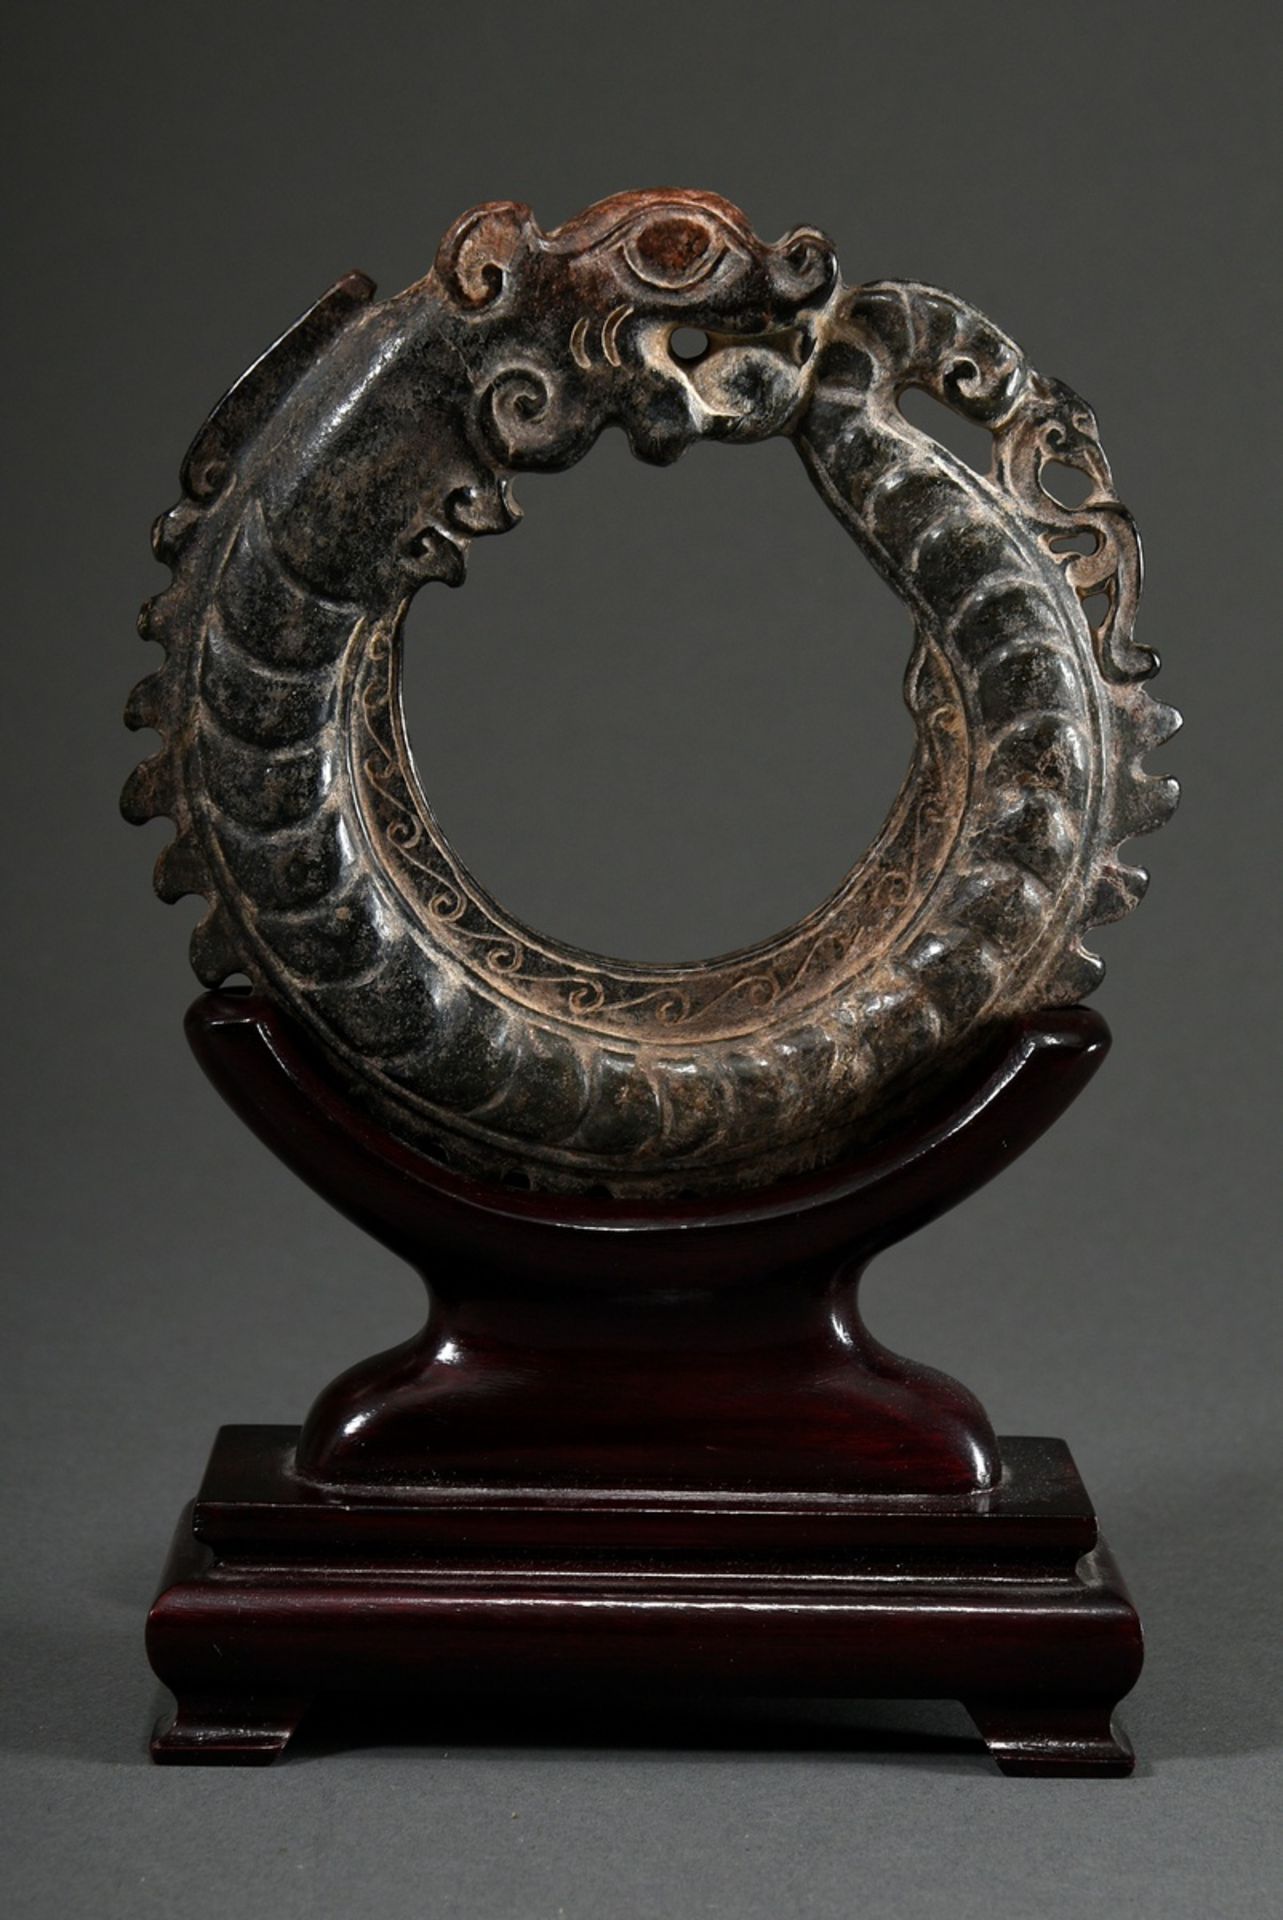 Dark jade carving "Round-laid dragon", powerfully stylised with jagged back and scales, wooden stan - Image 3 of 6